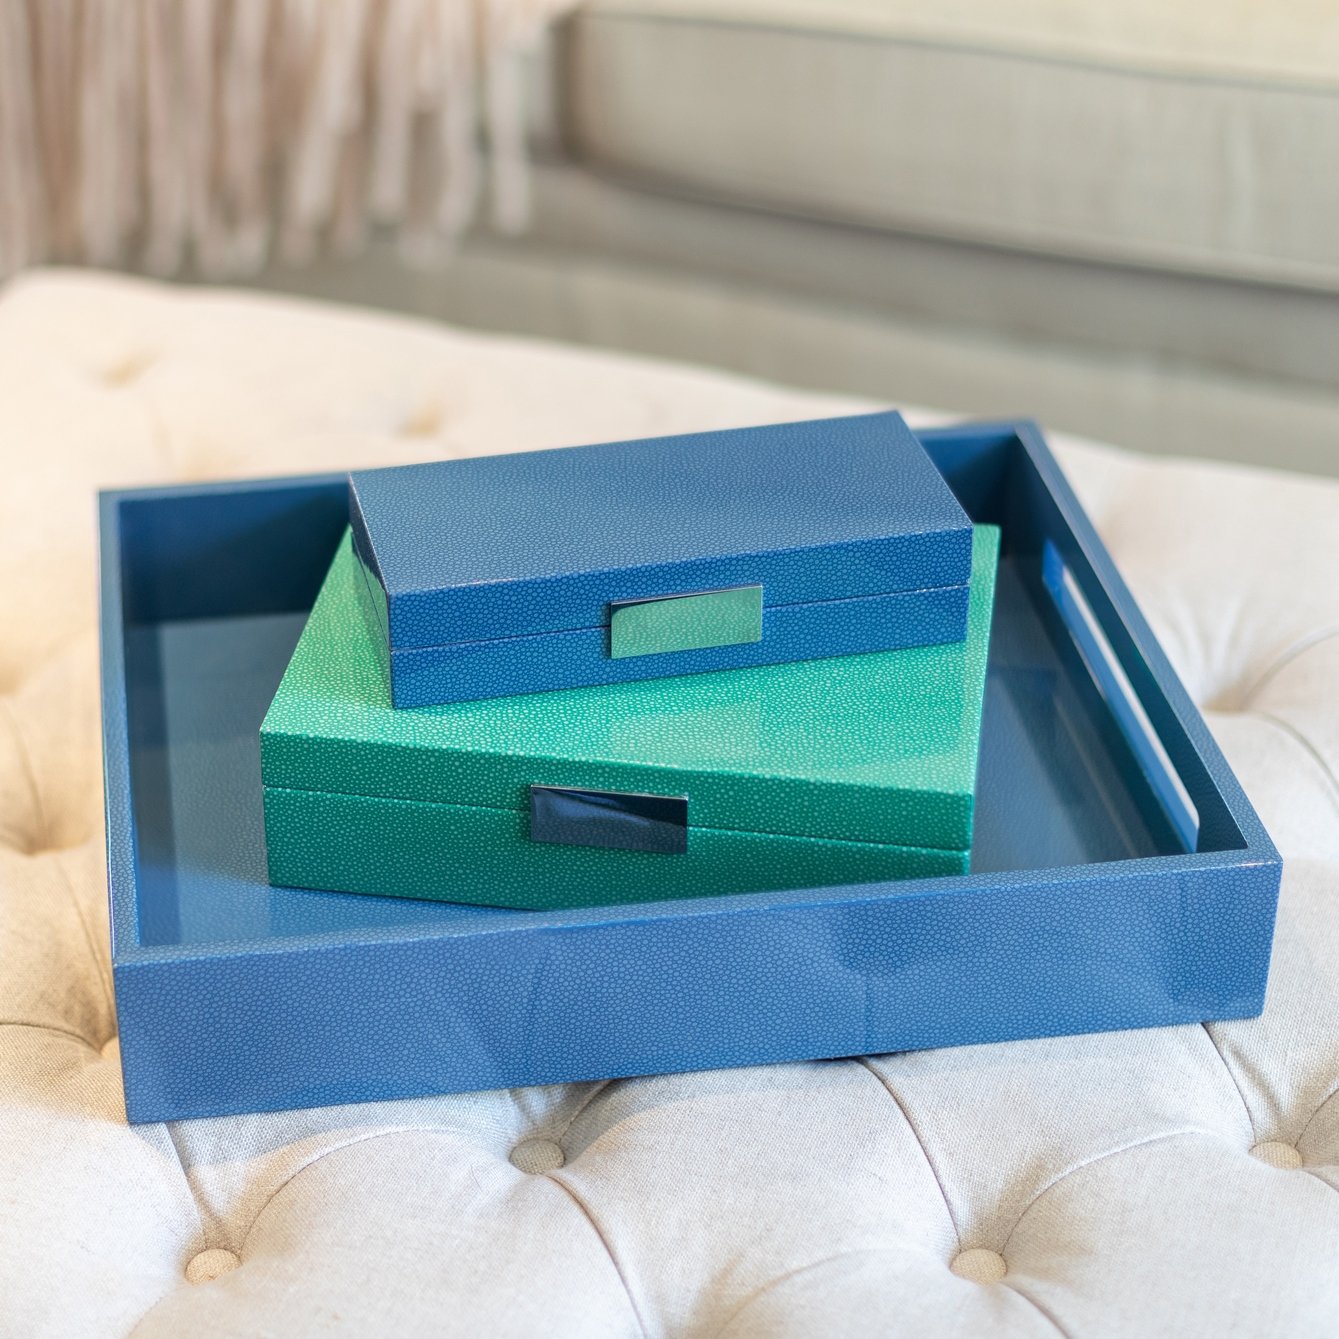 Addison Ross tray and storage boxes